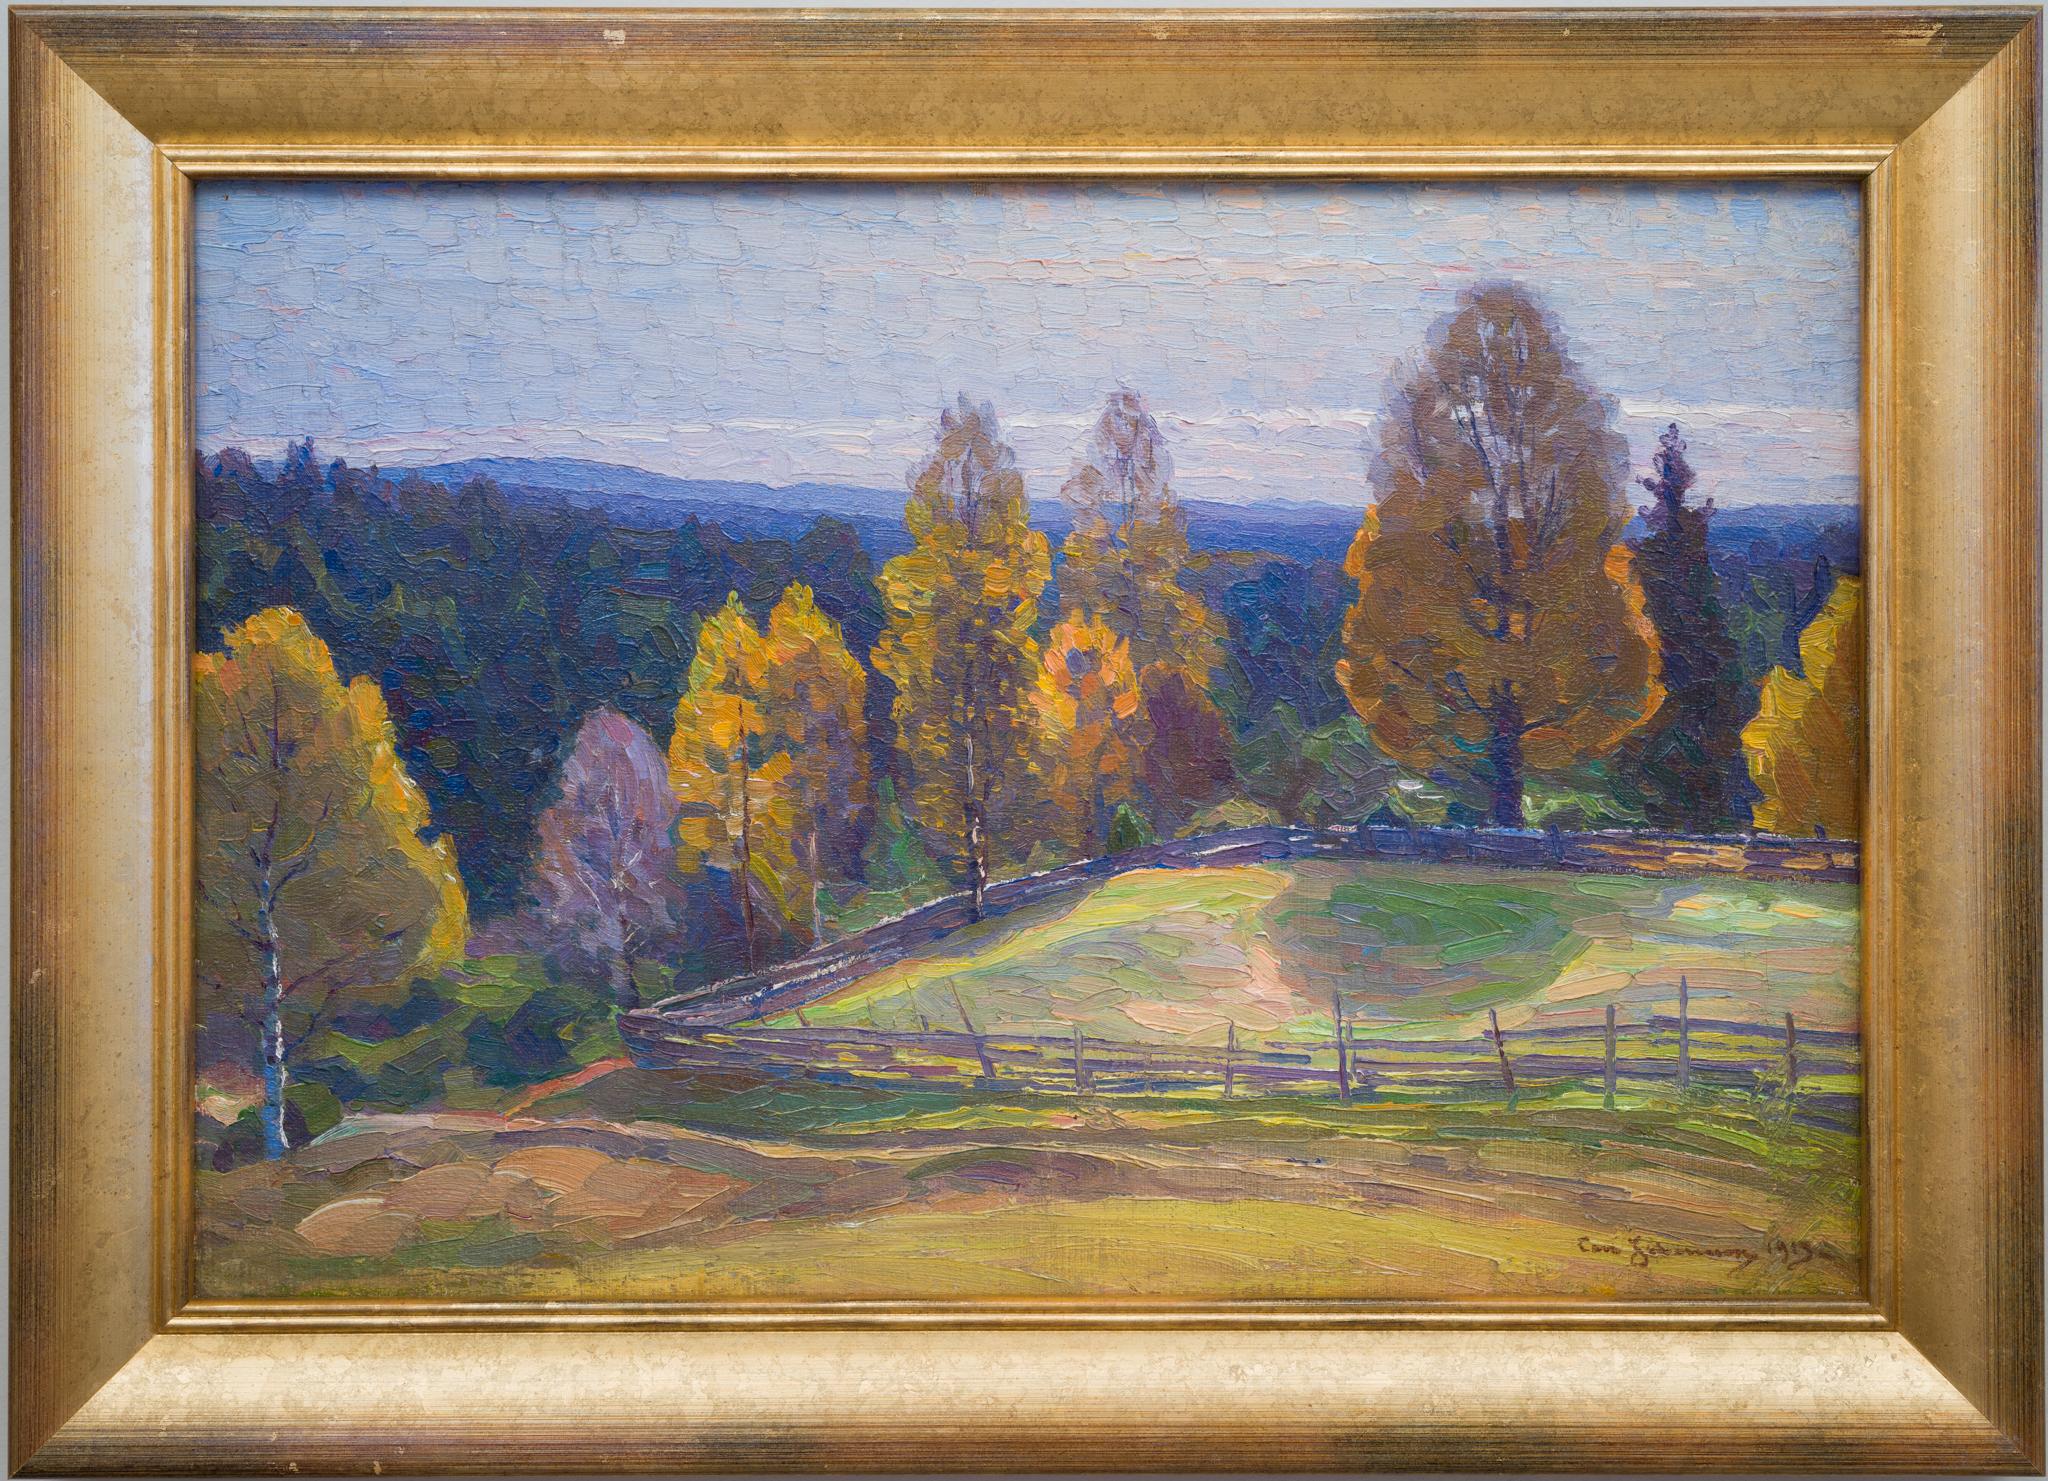 Vast Autumn Landscape With Blue Mountains by Swedish Artist Carl Johansson, 1913 - Painting by Carl Johansson 